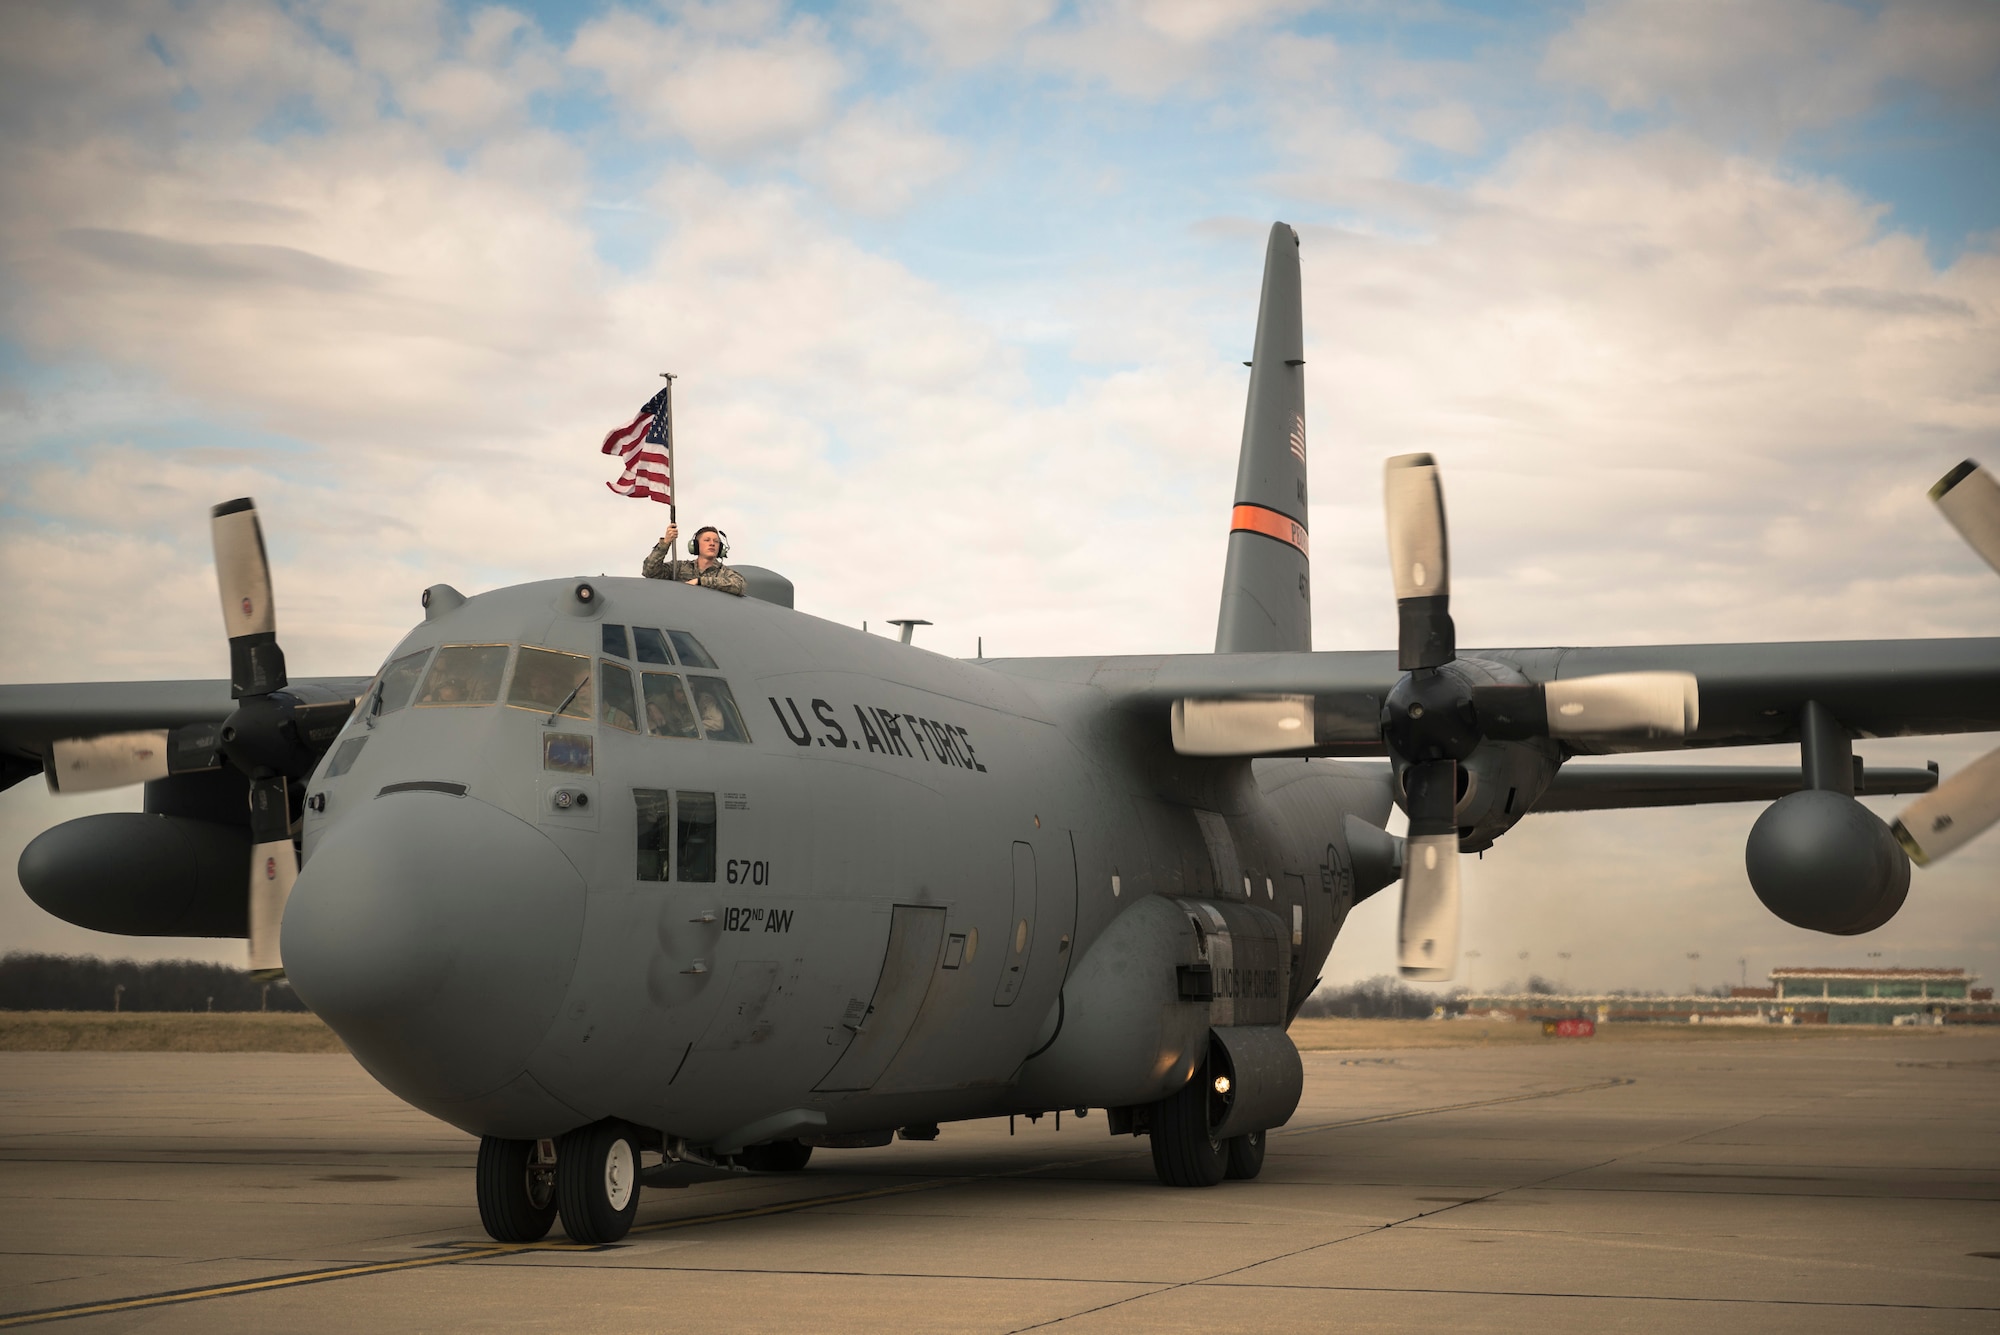 A member of the 182nd Airlift Wing waves the American flag as his C-130 Hercules returns to Peoria, Ill., from an overseas deployment March 5, 2017. More than 100 182nd Airlift Wing Airmen deployed to an undisclosed location in Southwest Asia in support of Operation Freedom’s Sentinel. (U.S. Air National Guard photo by Tech. Sgt. Lealan Buehrer)